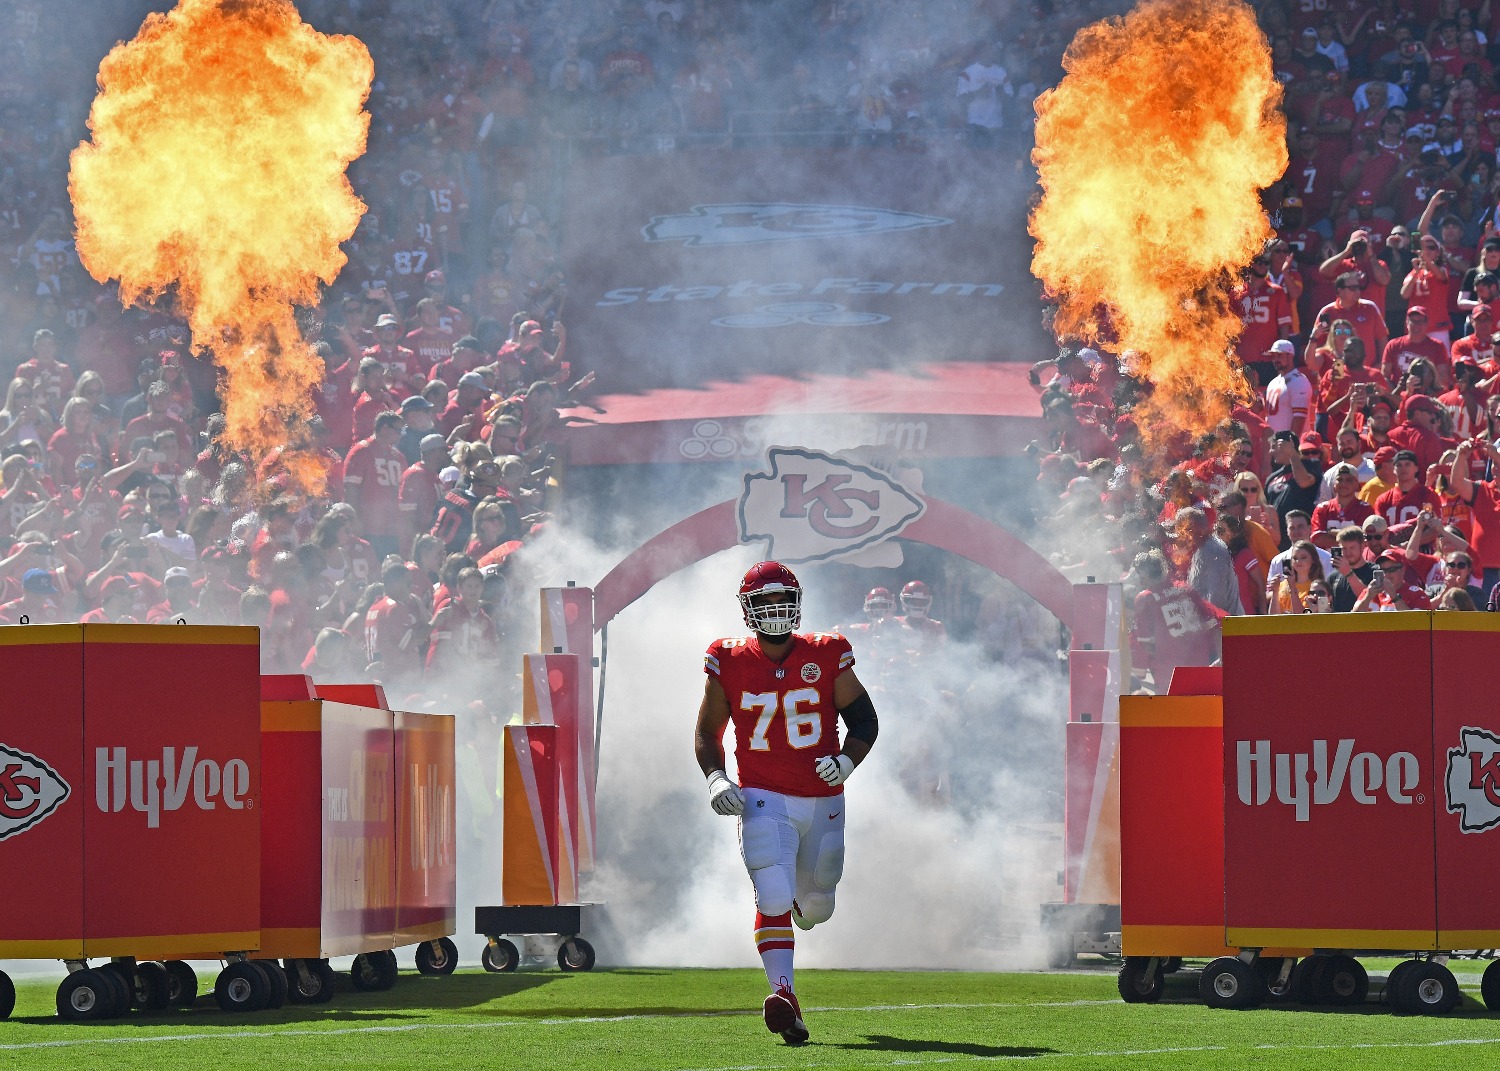 Kansas City Chiefs right guard Laurent Duvernay-Tardif opted out of the 2020 NFL season to keep fighting COVID-19 in the medical field.